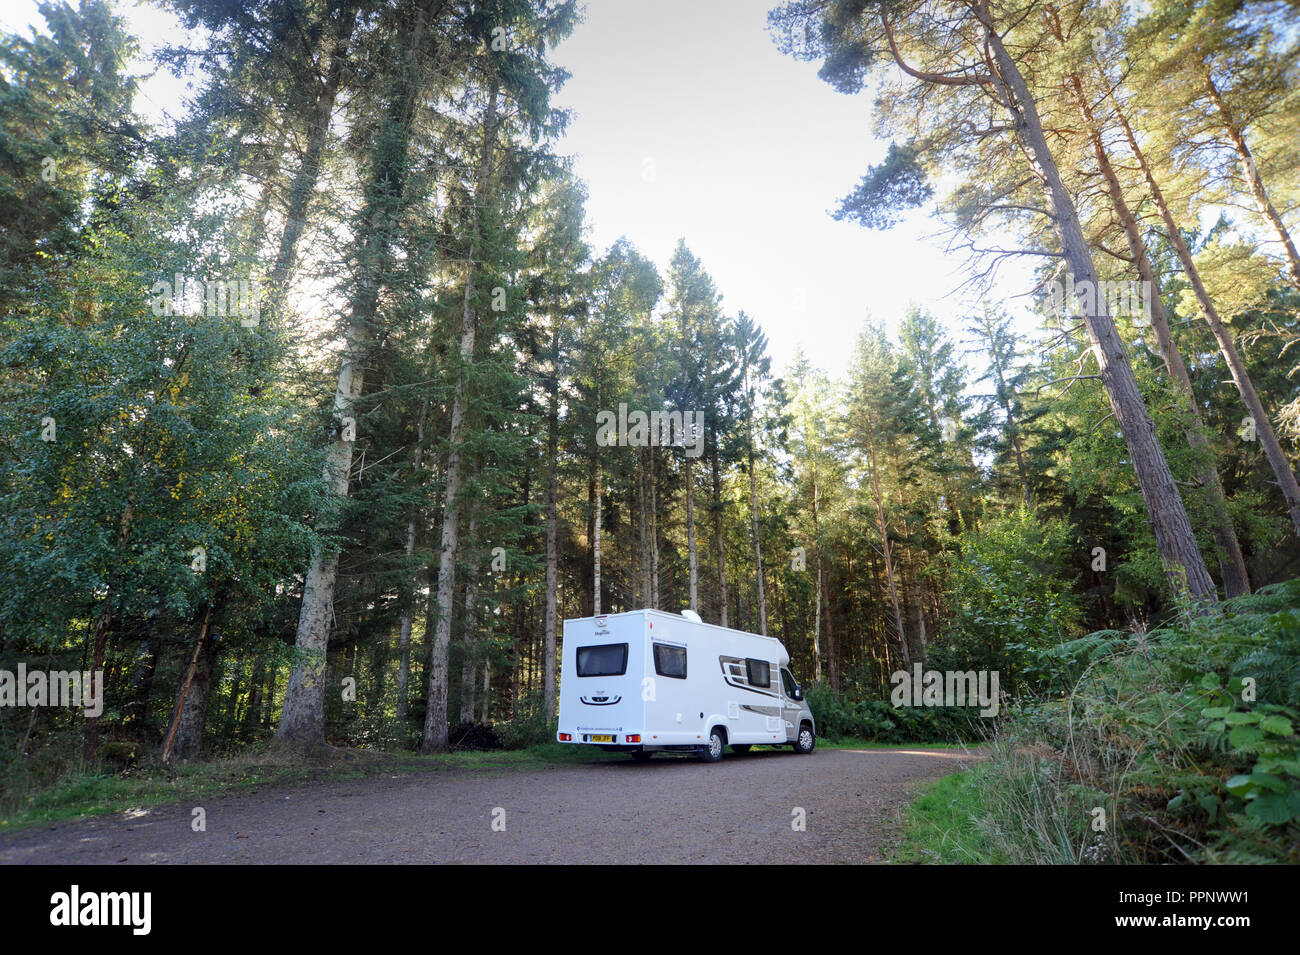 MOTORHOME PARKED IN WOODLAND RE WILD CAMPING CAMPERVANS TOURING HOLIDAYS UK Stock Photo